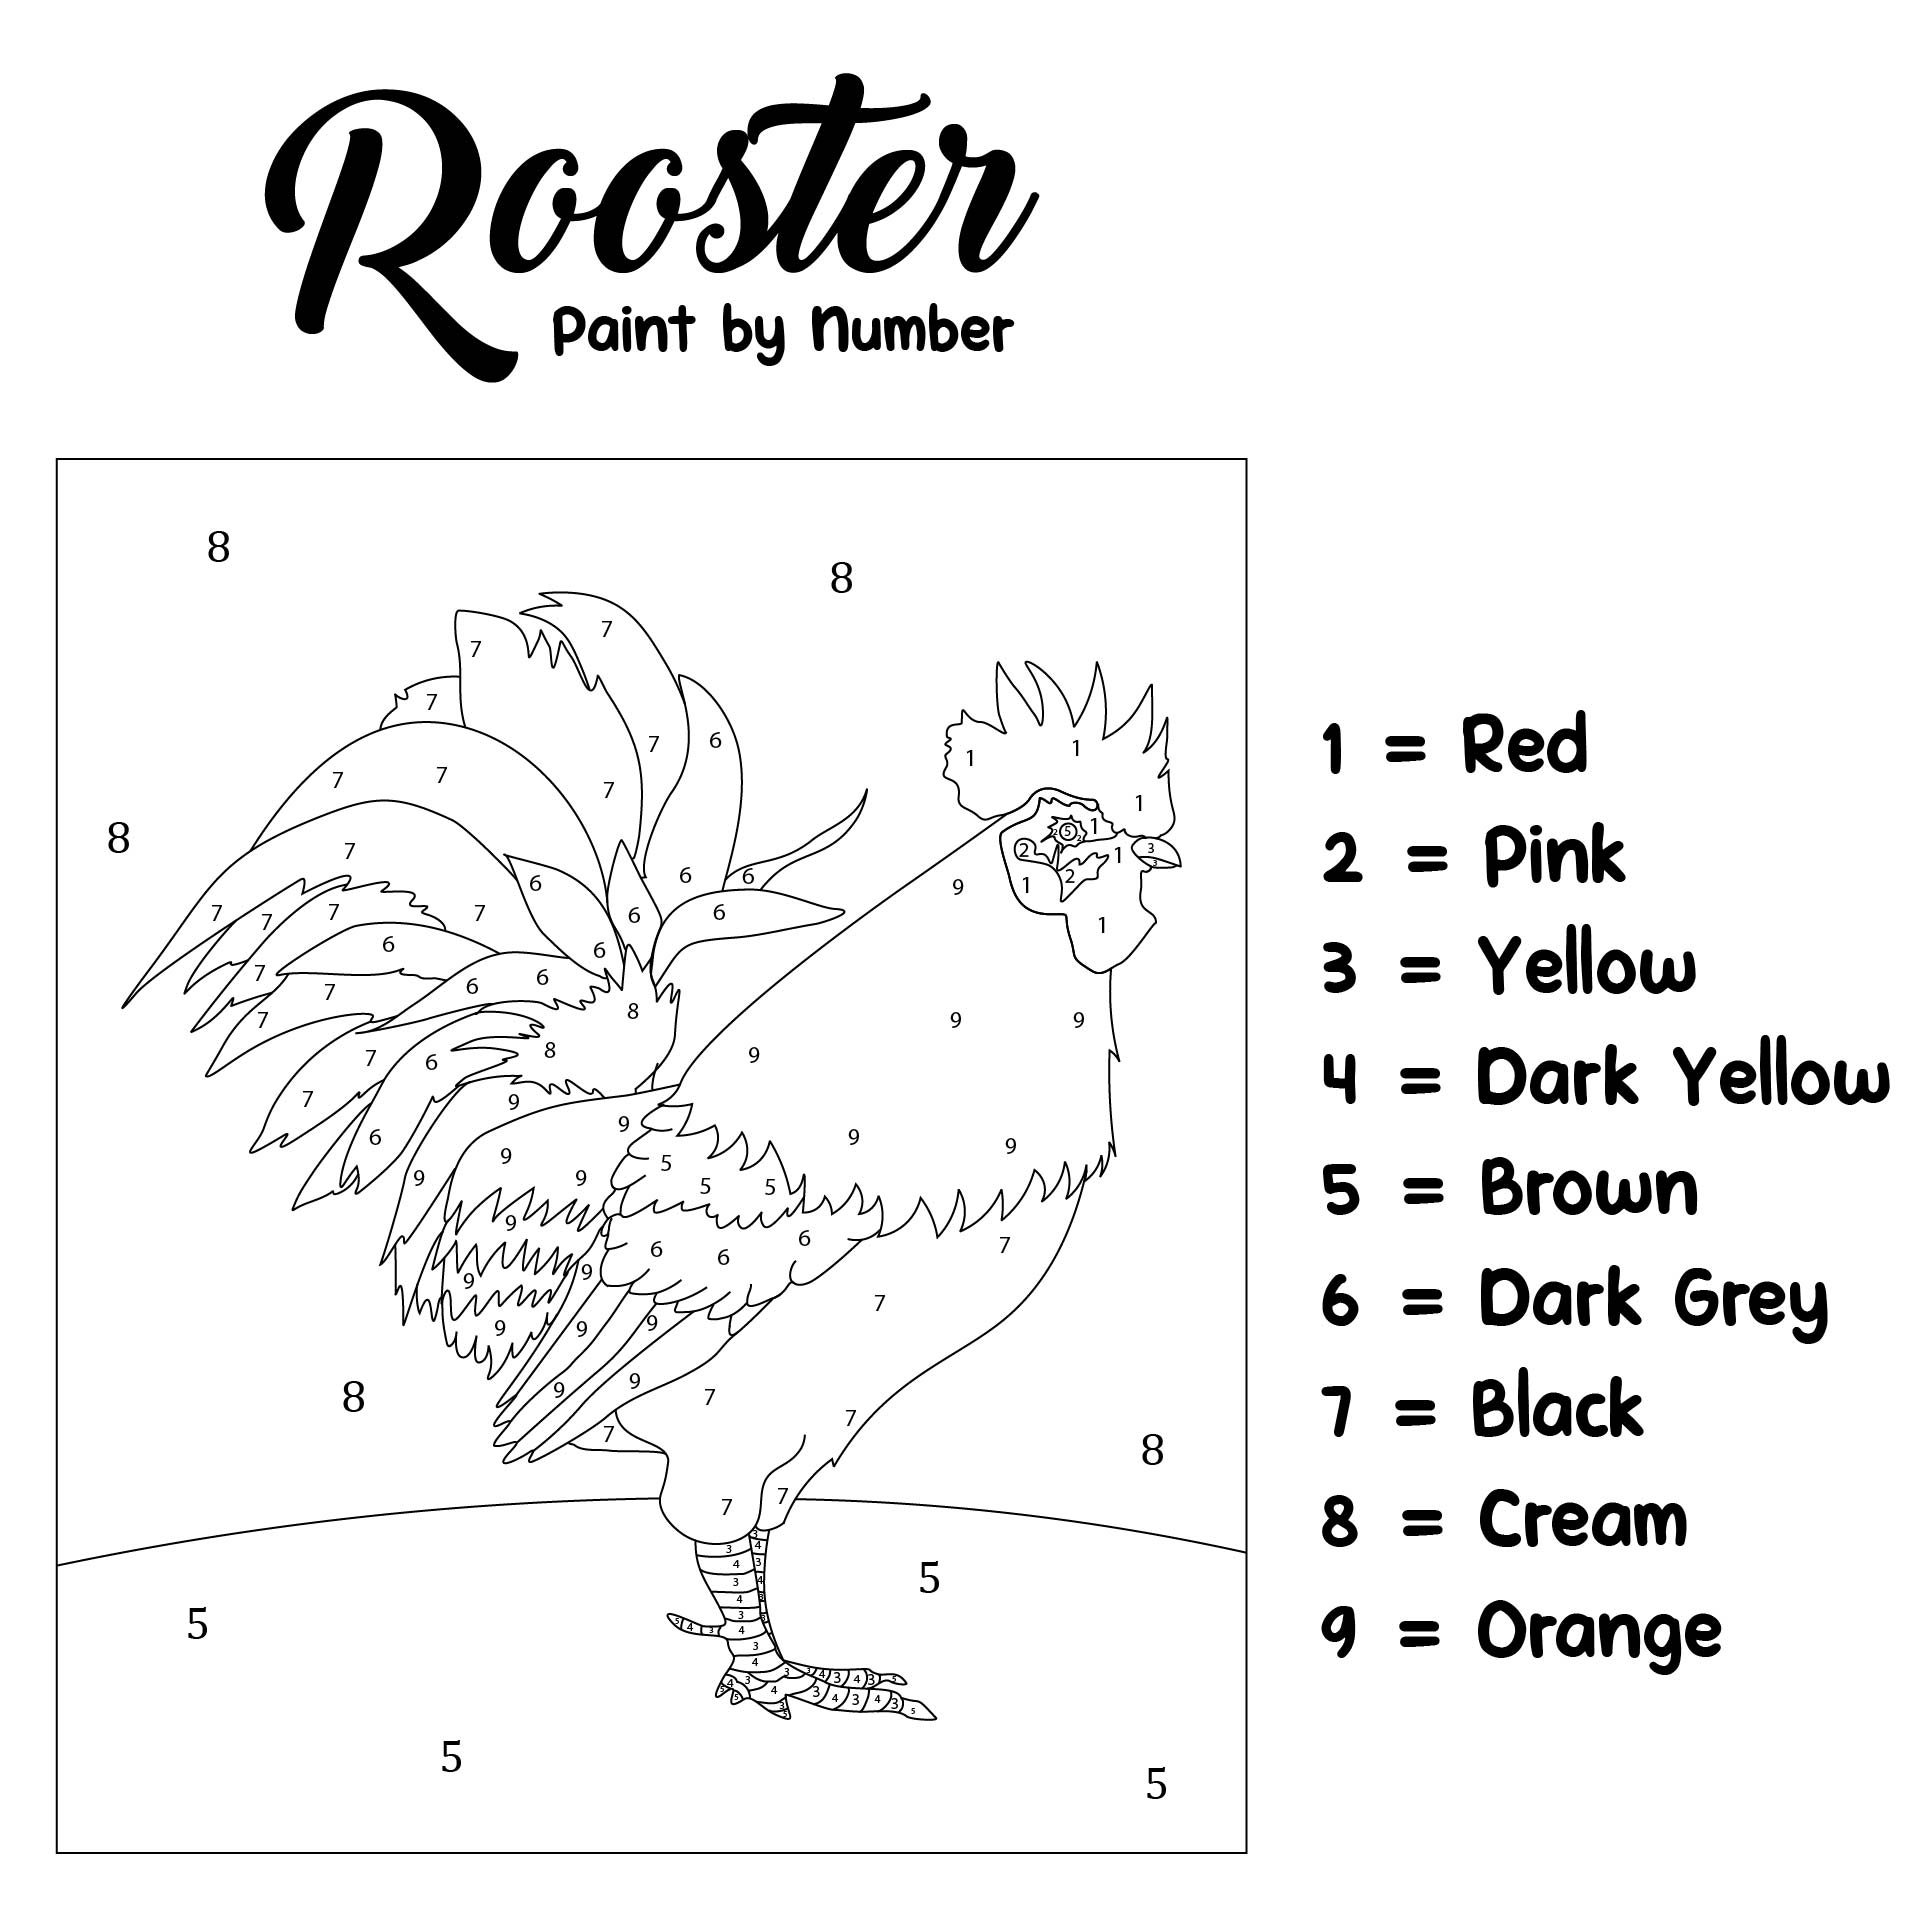 Rooster Paint by Number